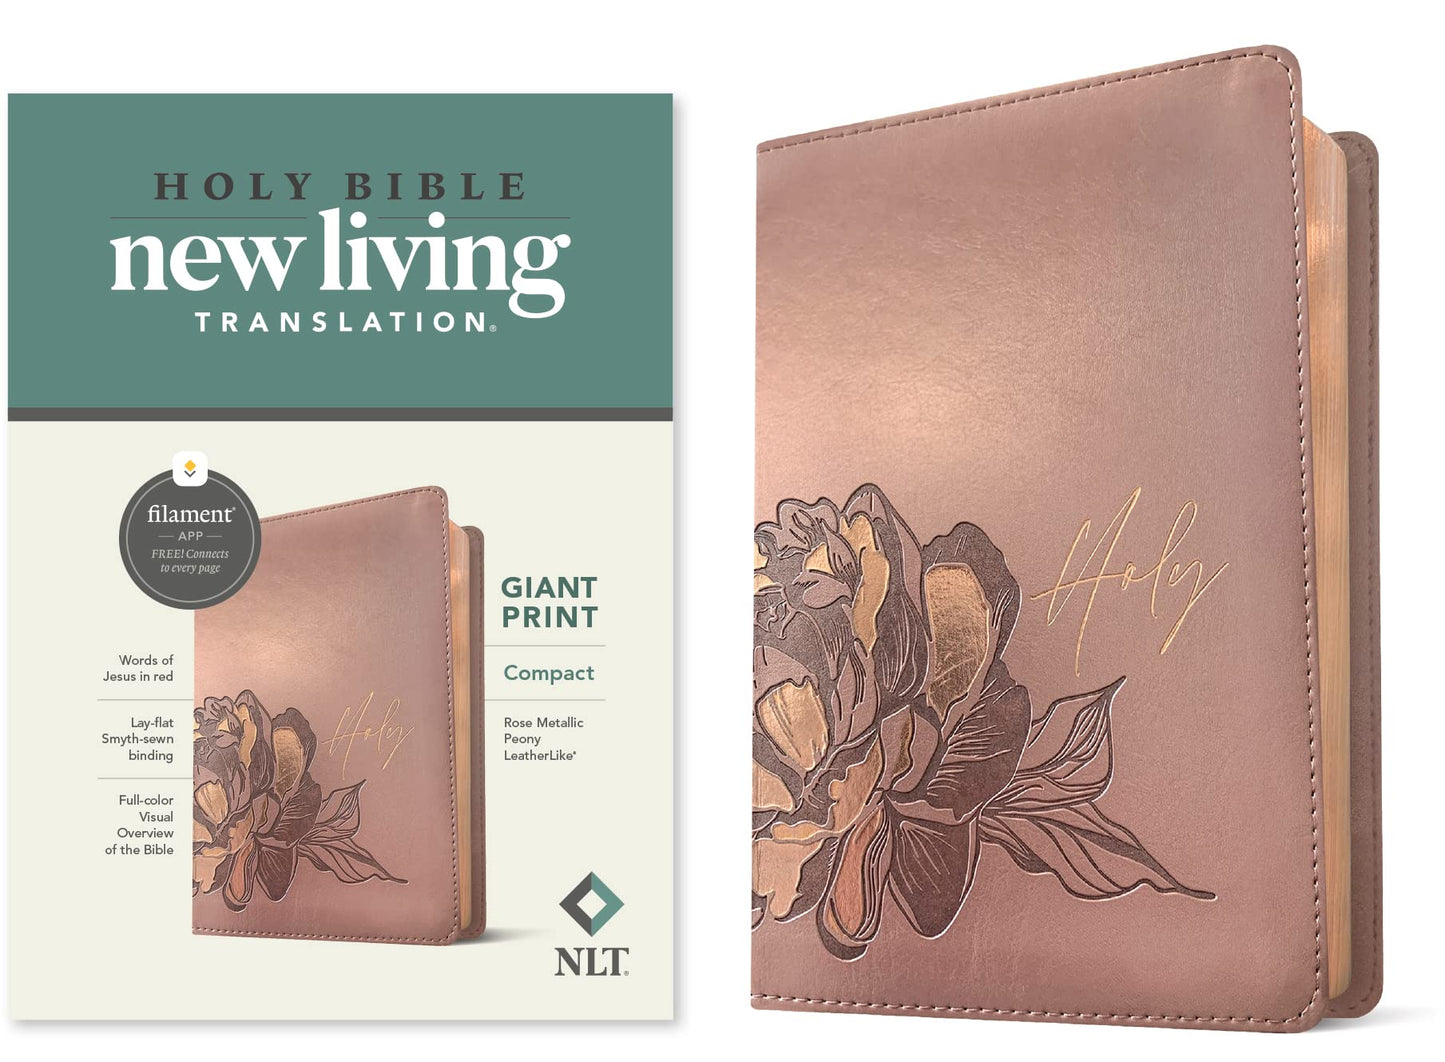 NLT Compact Giant Print Bible, Filament Enabled Edition (Red Letter, LeatherLike, Rose Metallic Peony)